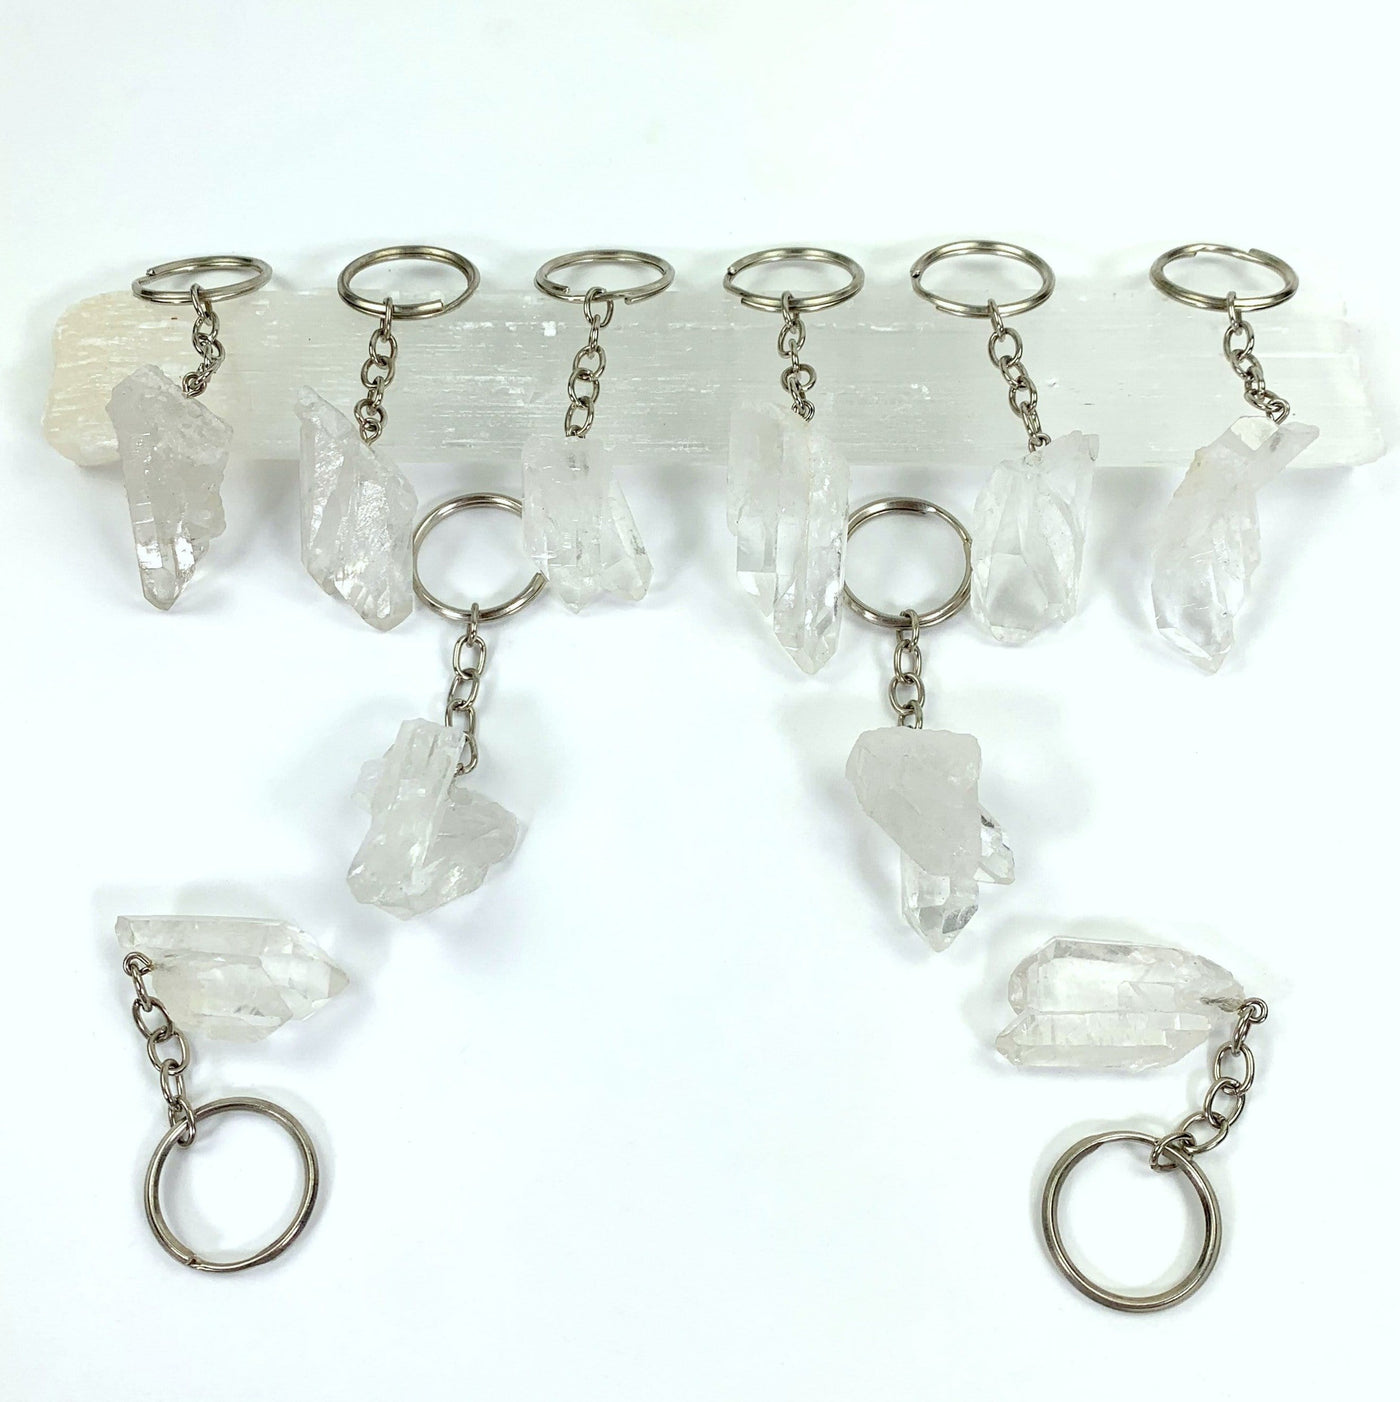 10 Twin Crystal Points Keychains 